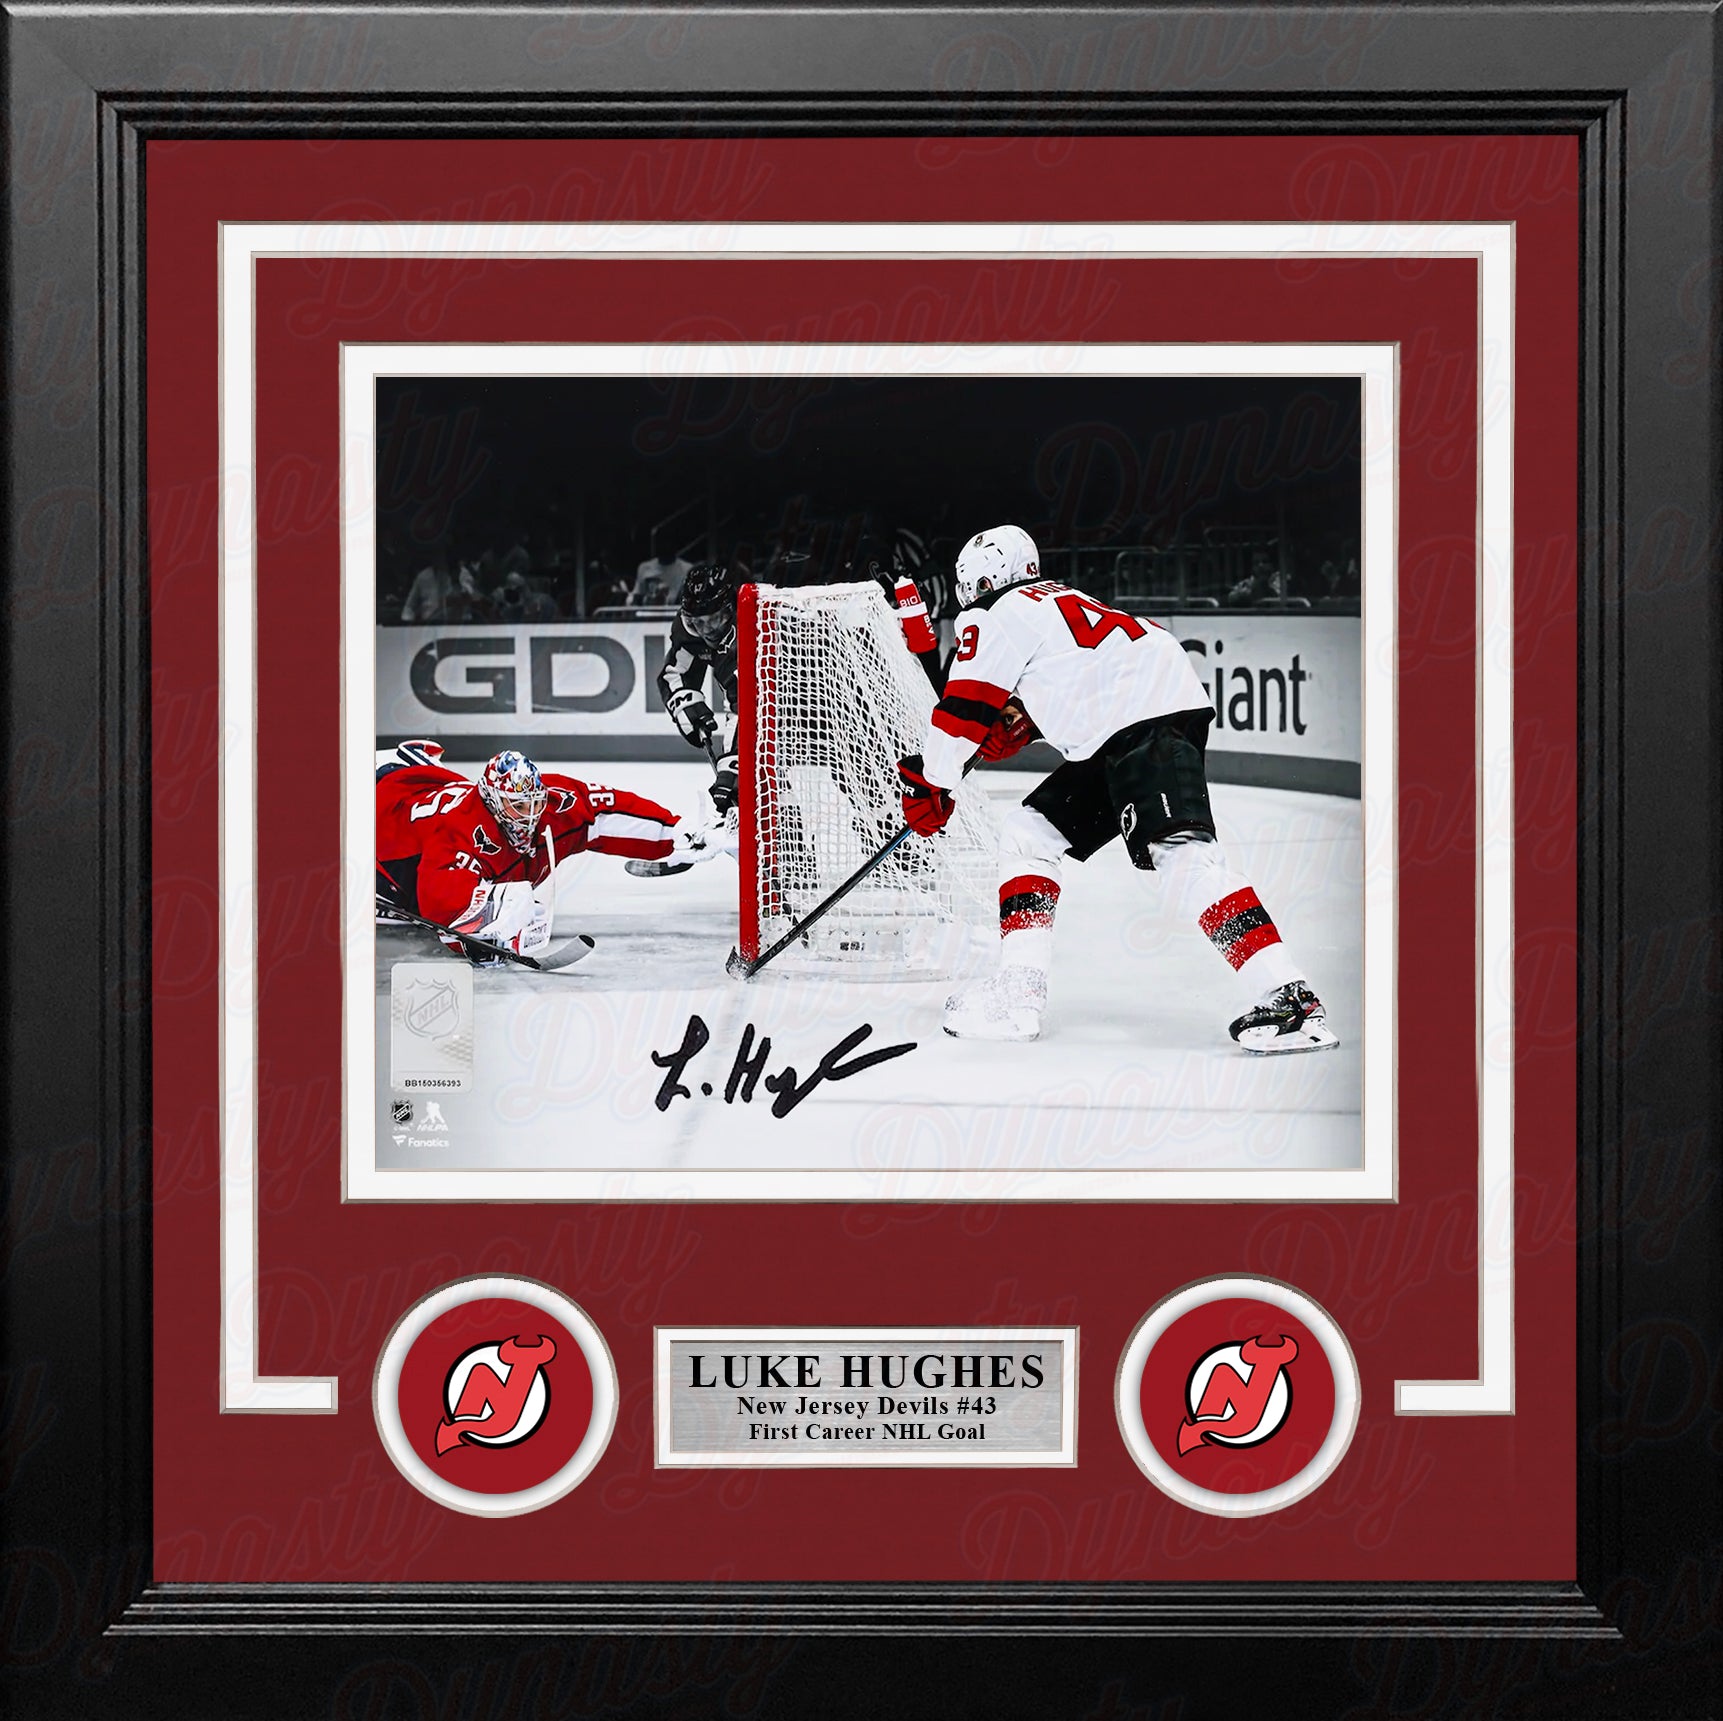 Jack Hughes New Jersey Devils Fanatics Authentic Autographed Red